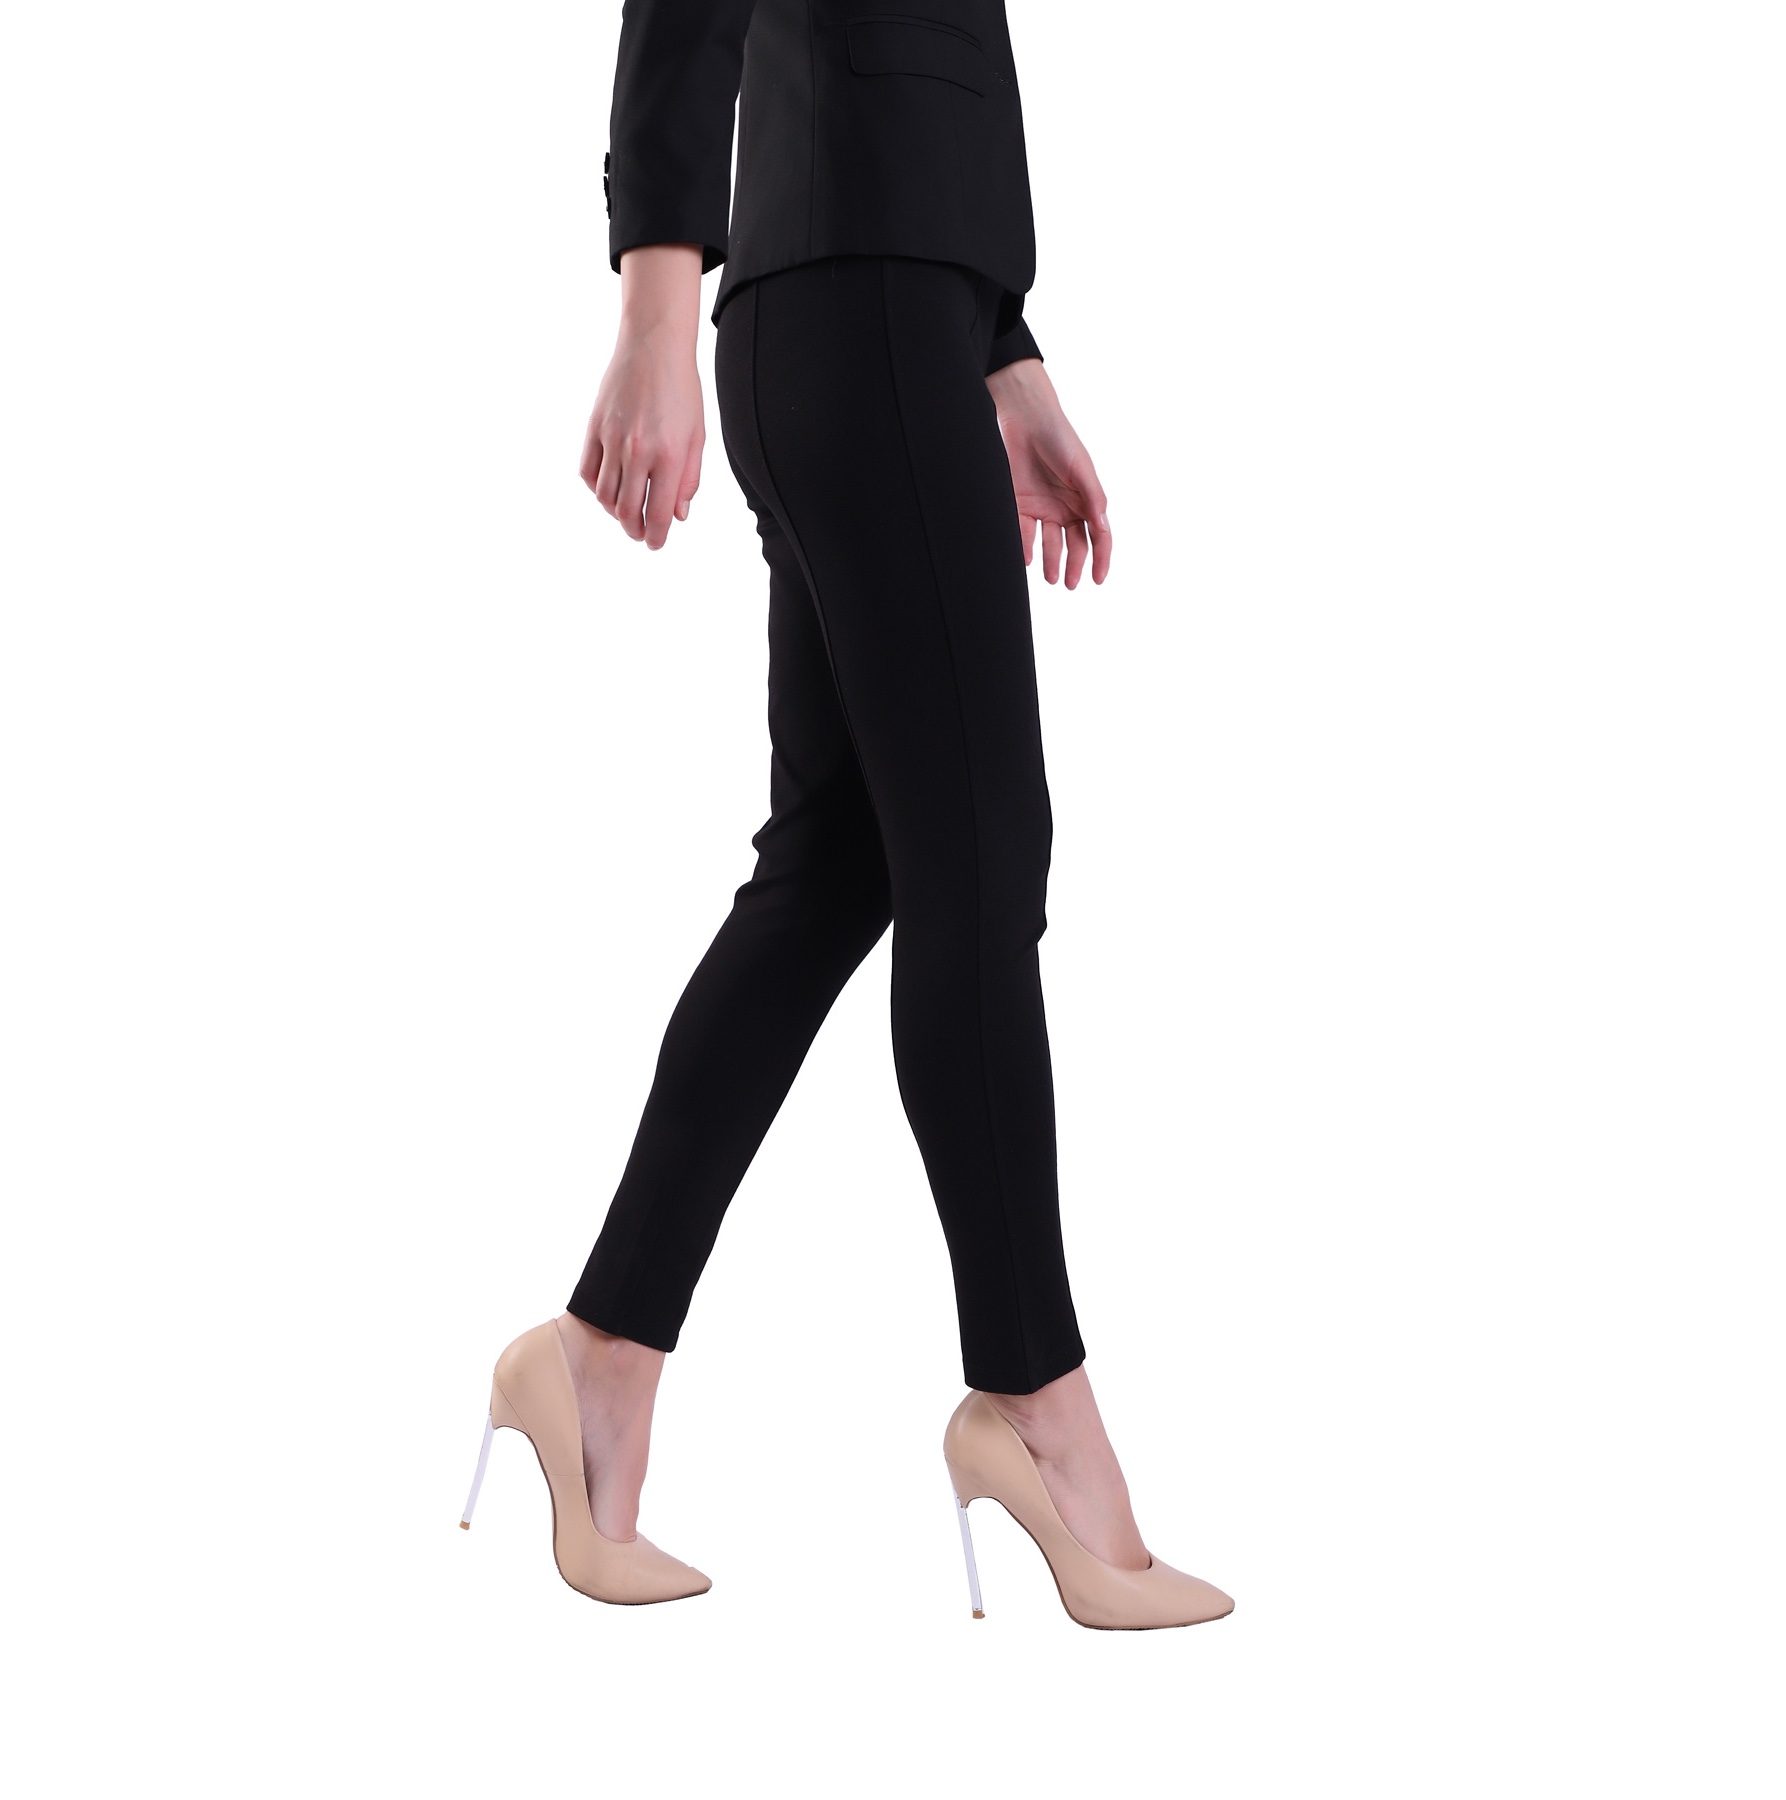 Women Stretch Pull-on Casual Ponte Pencil Pant Legging Slim or Bootcut